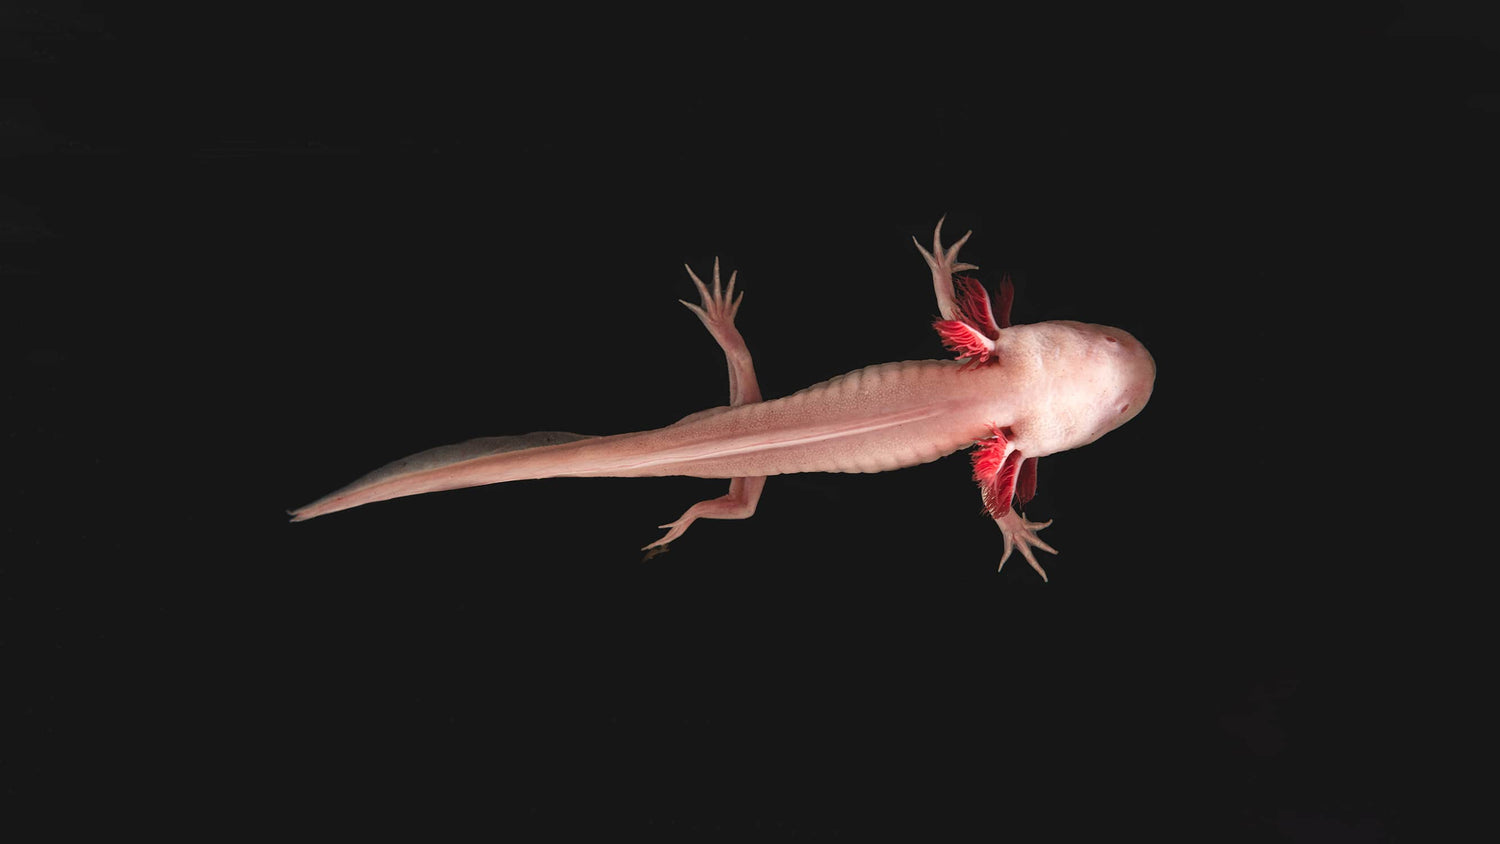 Where Do Axolotls Live and Why Are They Endangered?